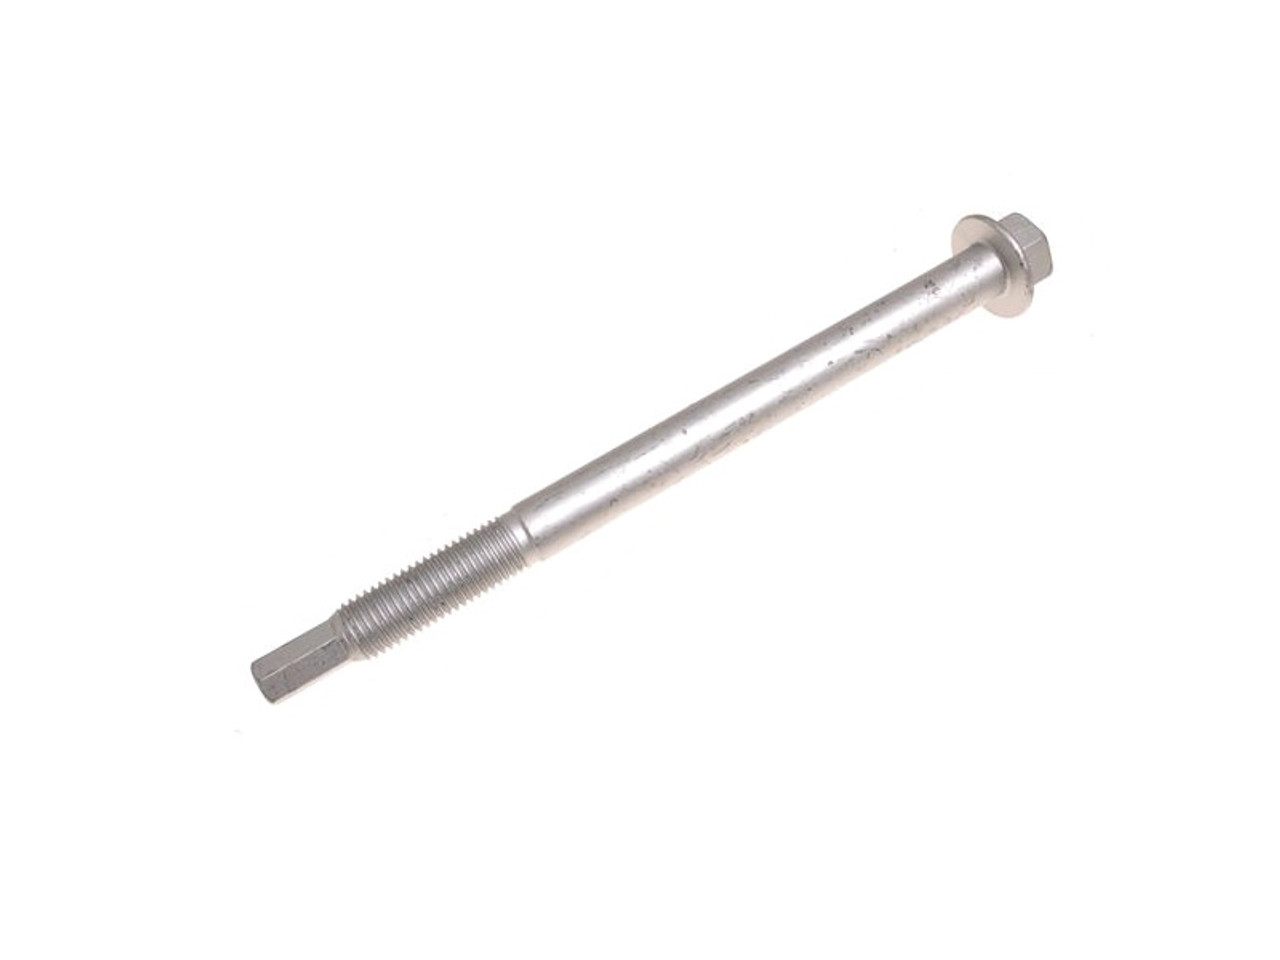 Genuine Discovery 3 and 4 Front Lower Shocker Bolt - RYG000440